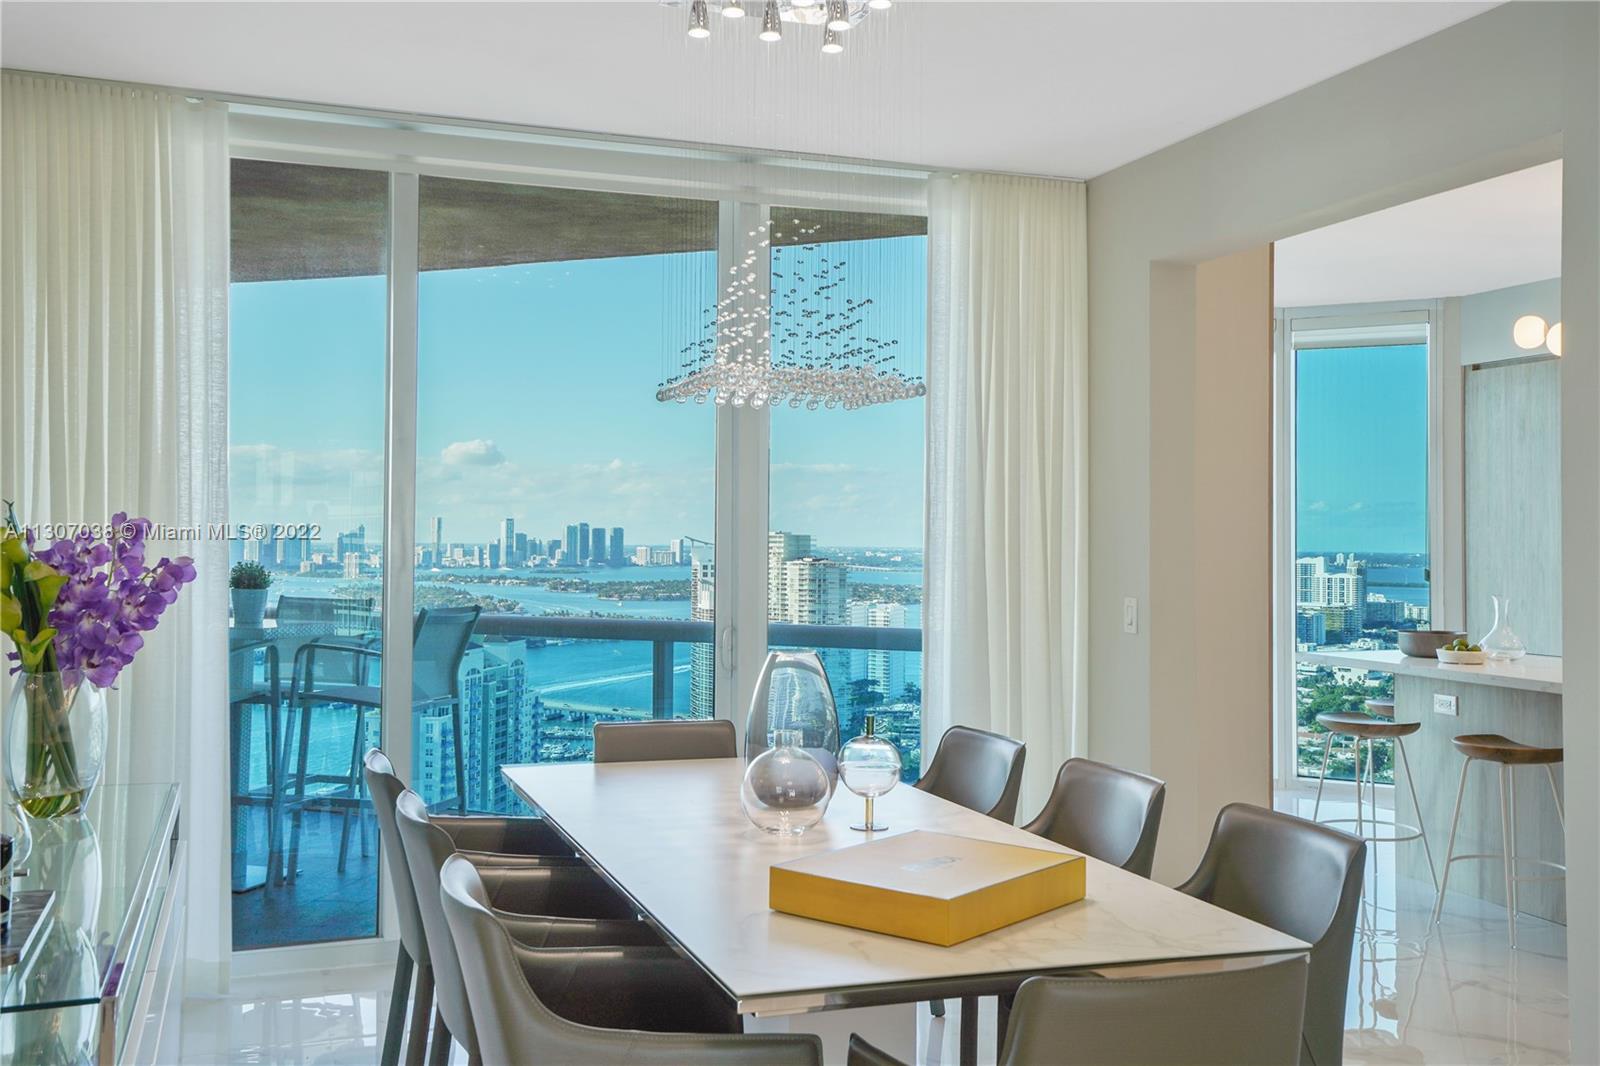 300 S Pointe Dr 4306, Miami Beach, Florida 33139, 3 Bedrooms Bedrooms, ,3 BathroomsBathrooms,Residential,For Sale,300 S Pointe Dr 4306,A11307038